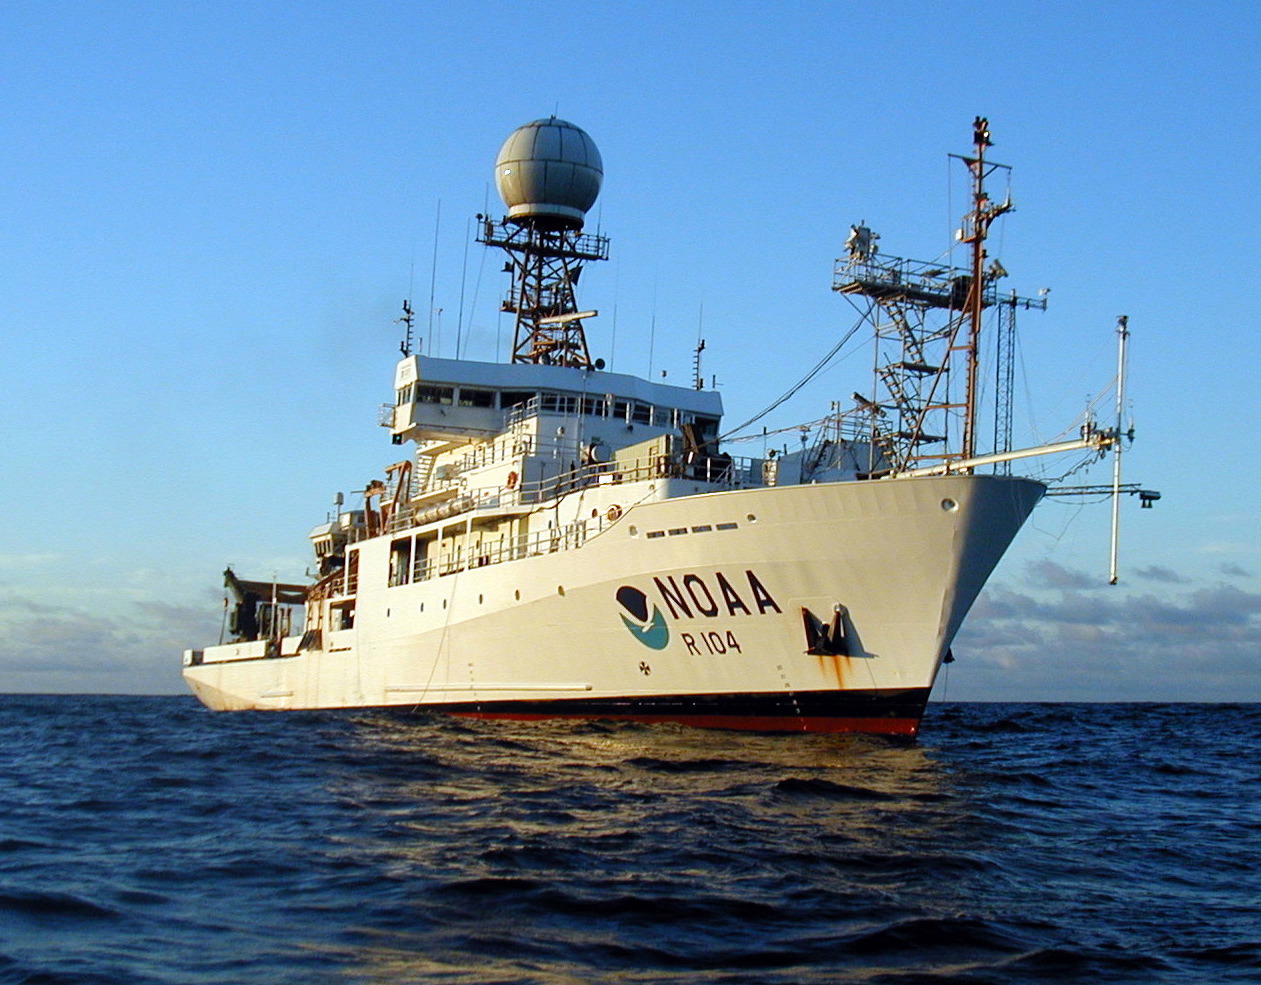 Image of the Ron Brown ship